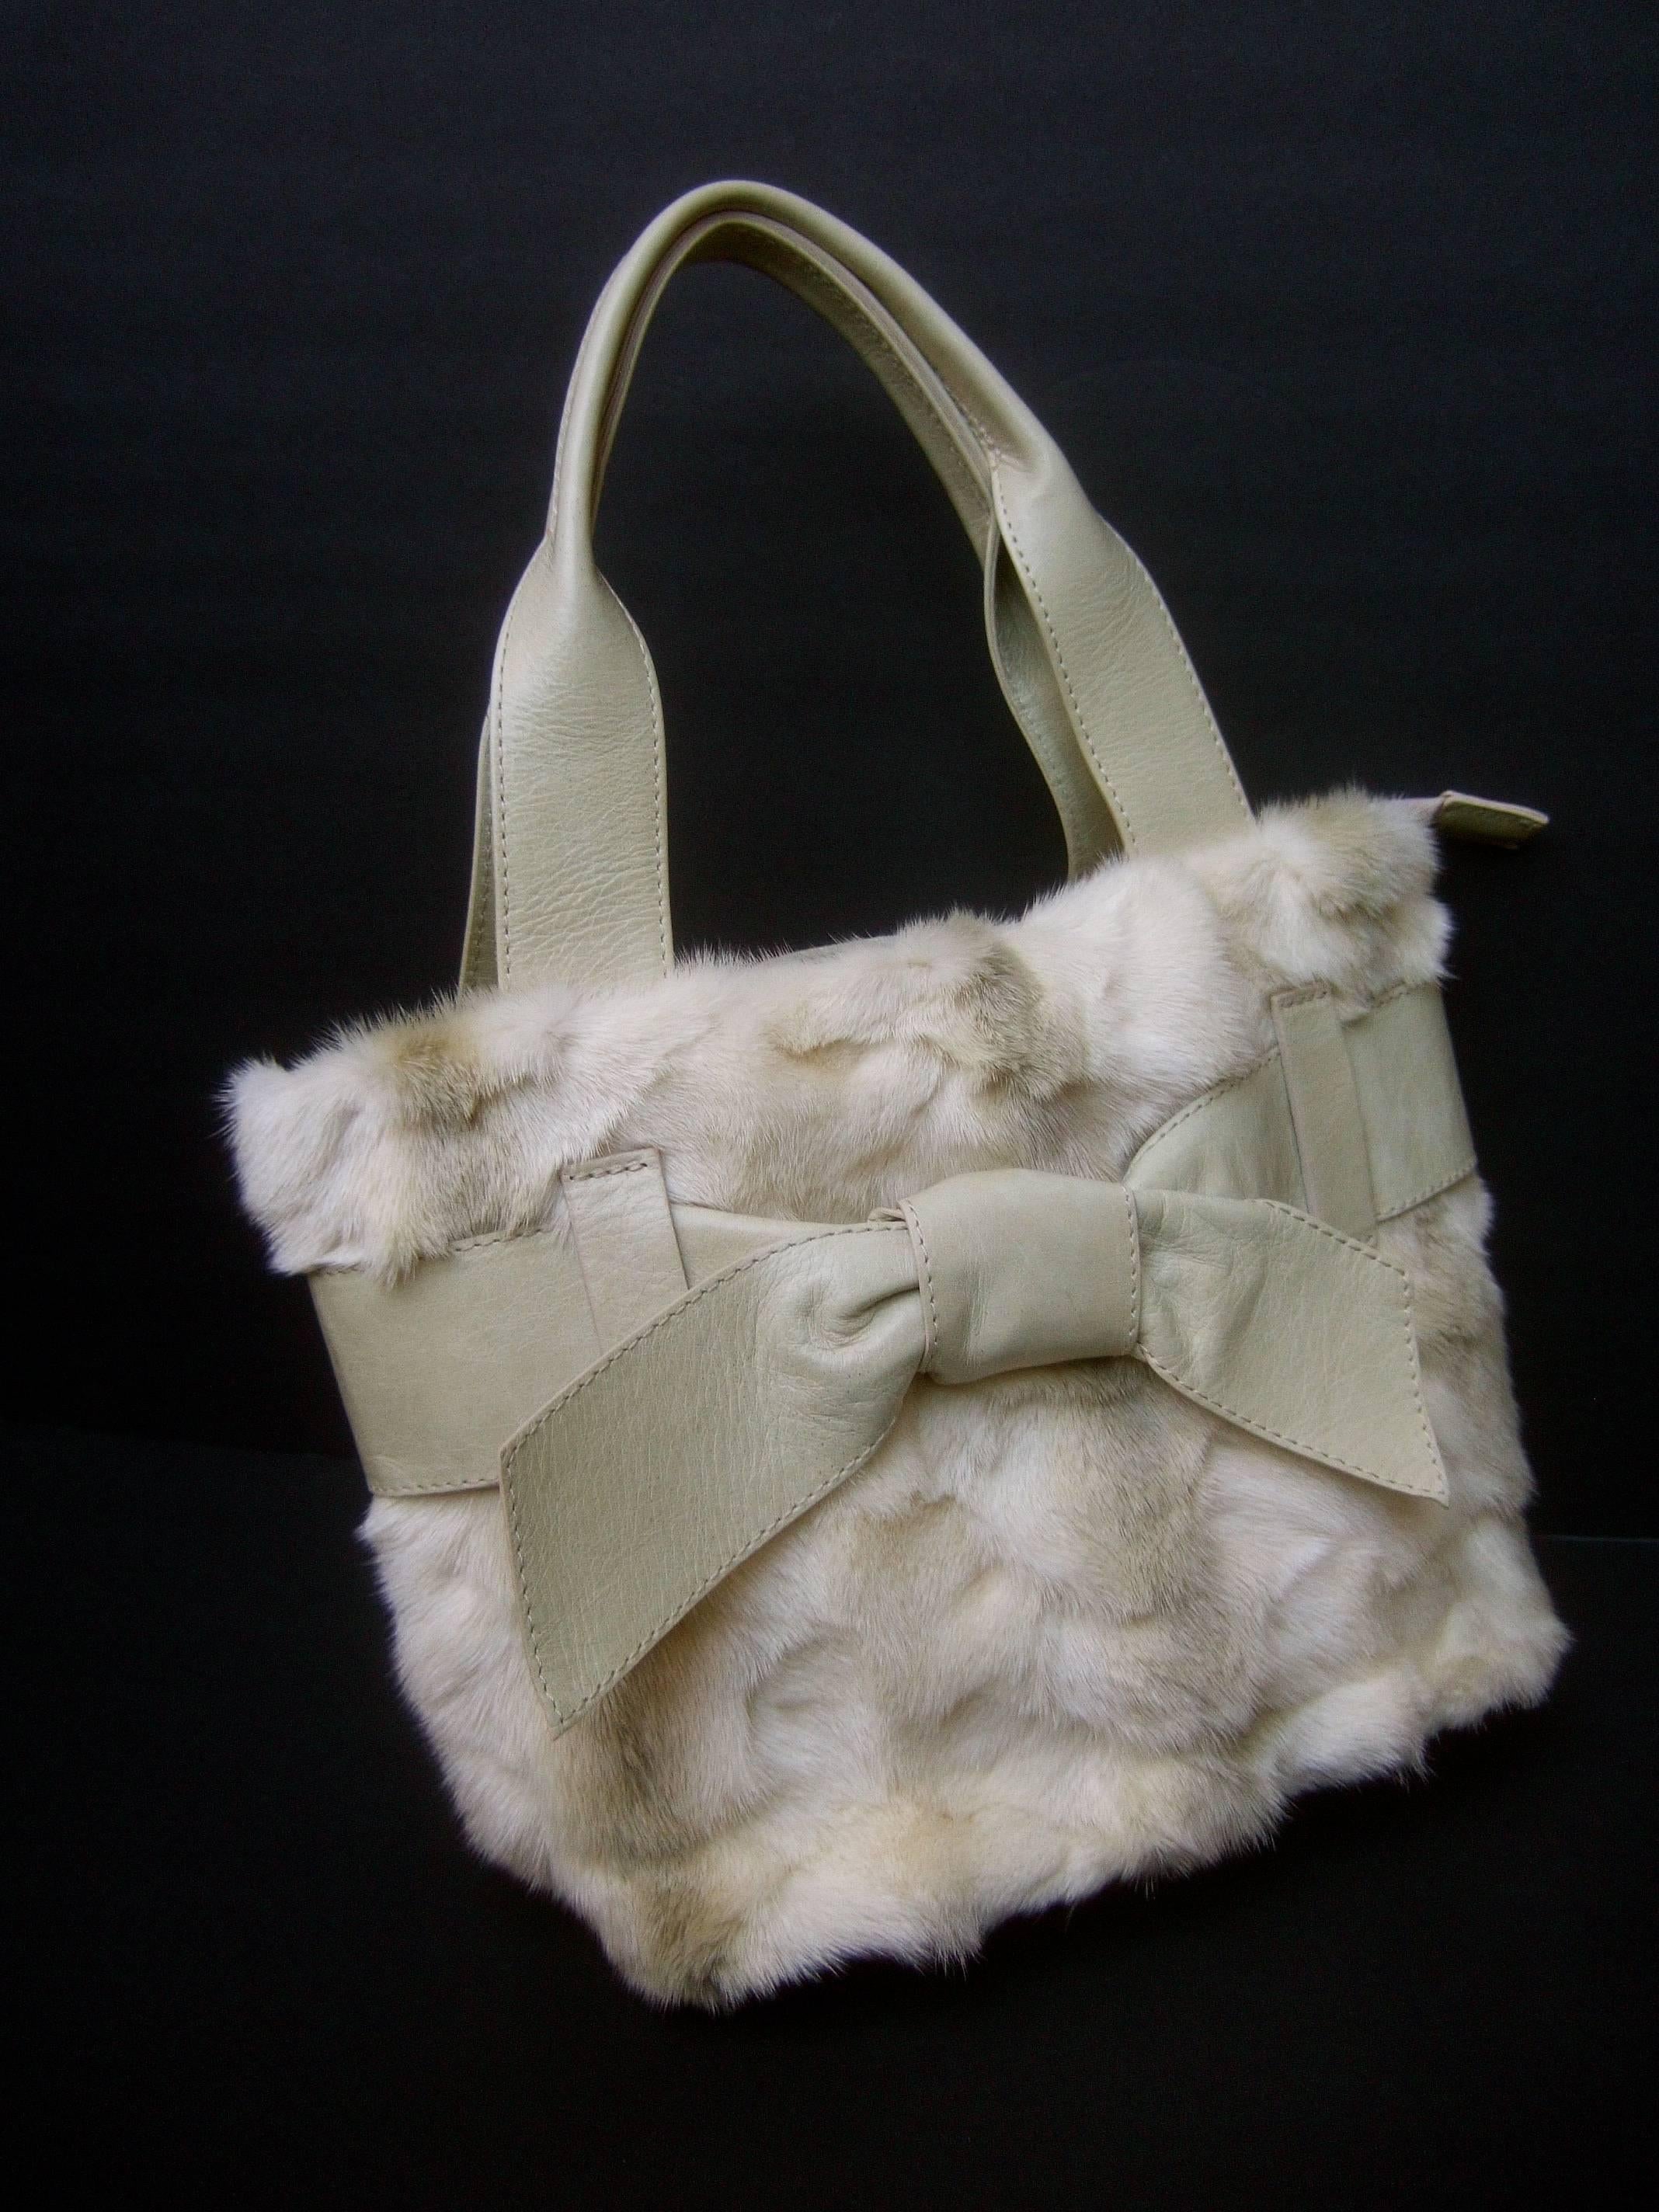 Italian Blonde mink fur ivory leather handbag 
The luxurious handbag is designed with plush 
sheared blonde mink fur on the front exterior
with subtle streaks of pale gray mink fur 

Accented with an ivory color leather bow that
runs across the